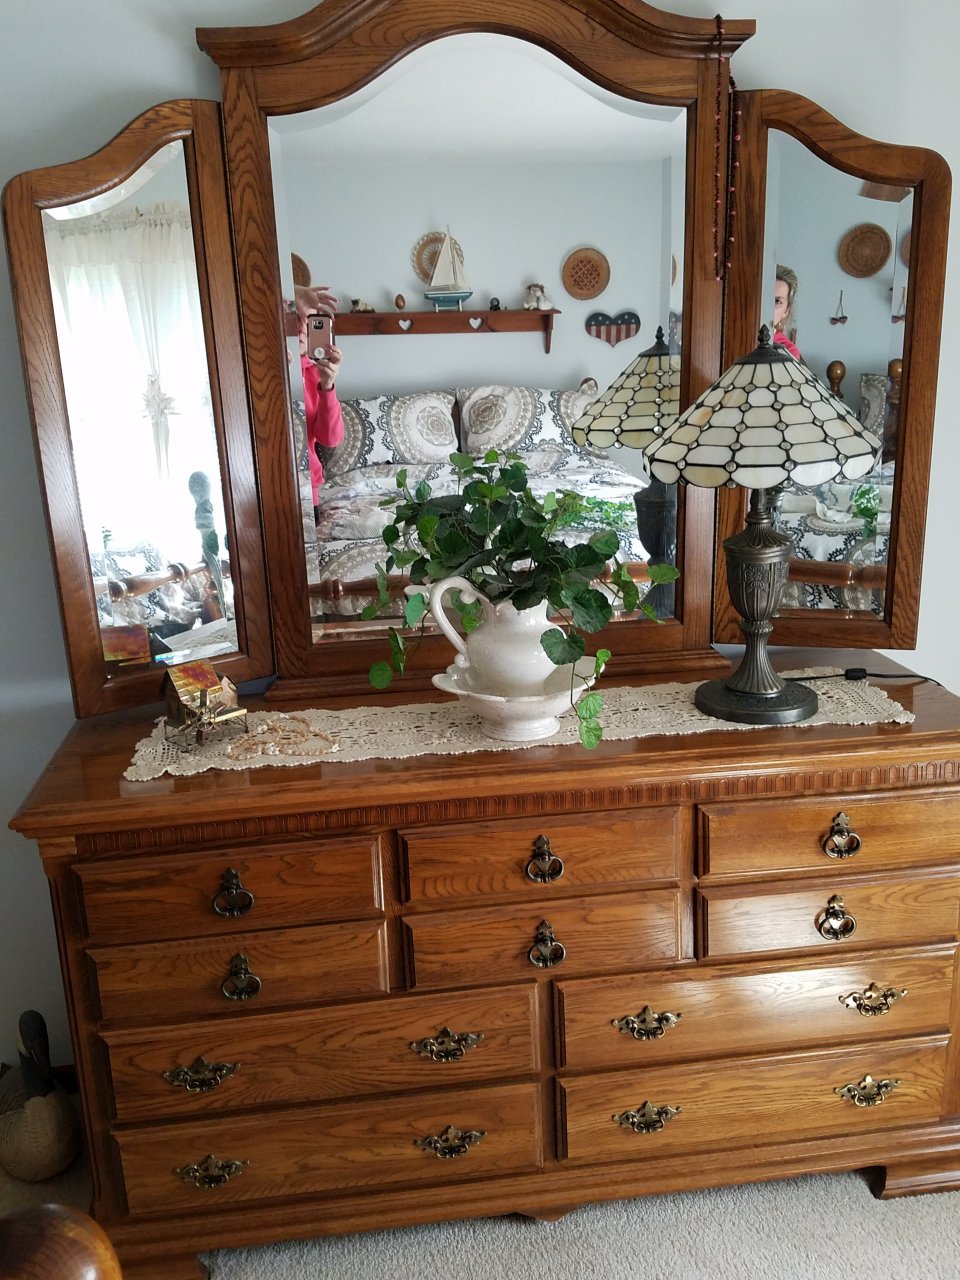 Anybody Have Any Idea What A Kincaid Vintage 5 Piece Bedroom Set Would